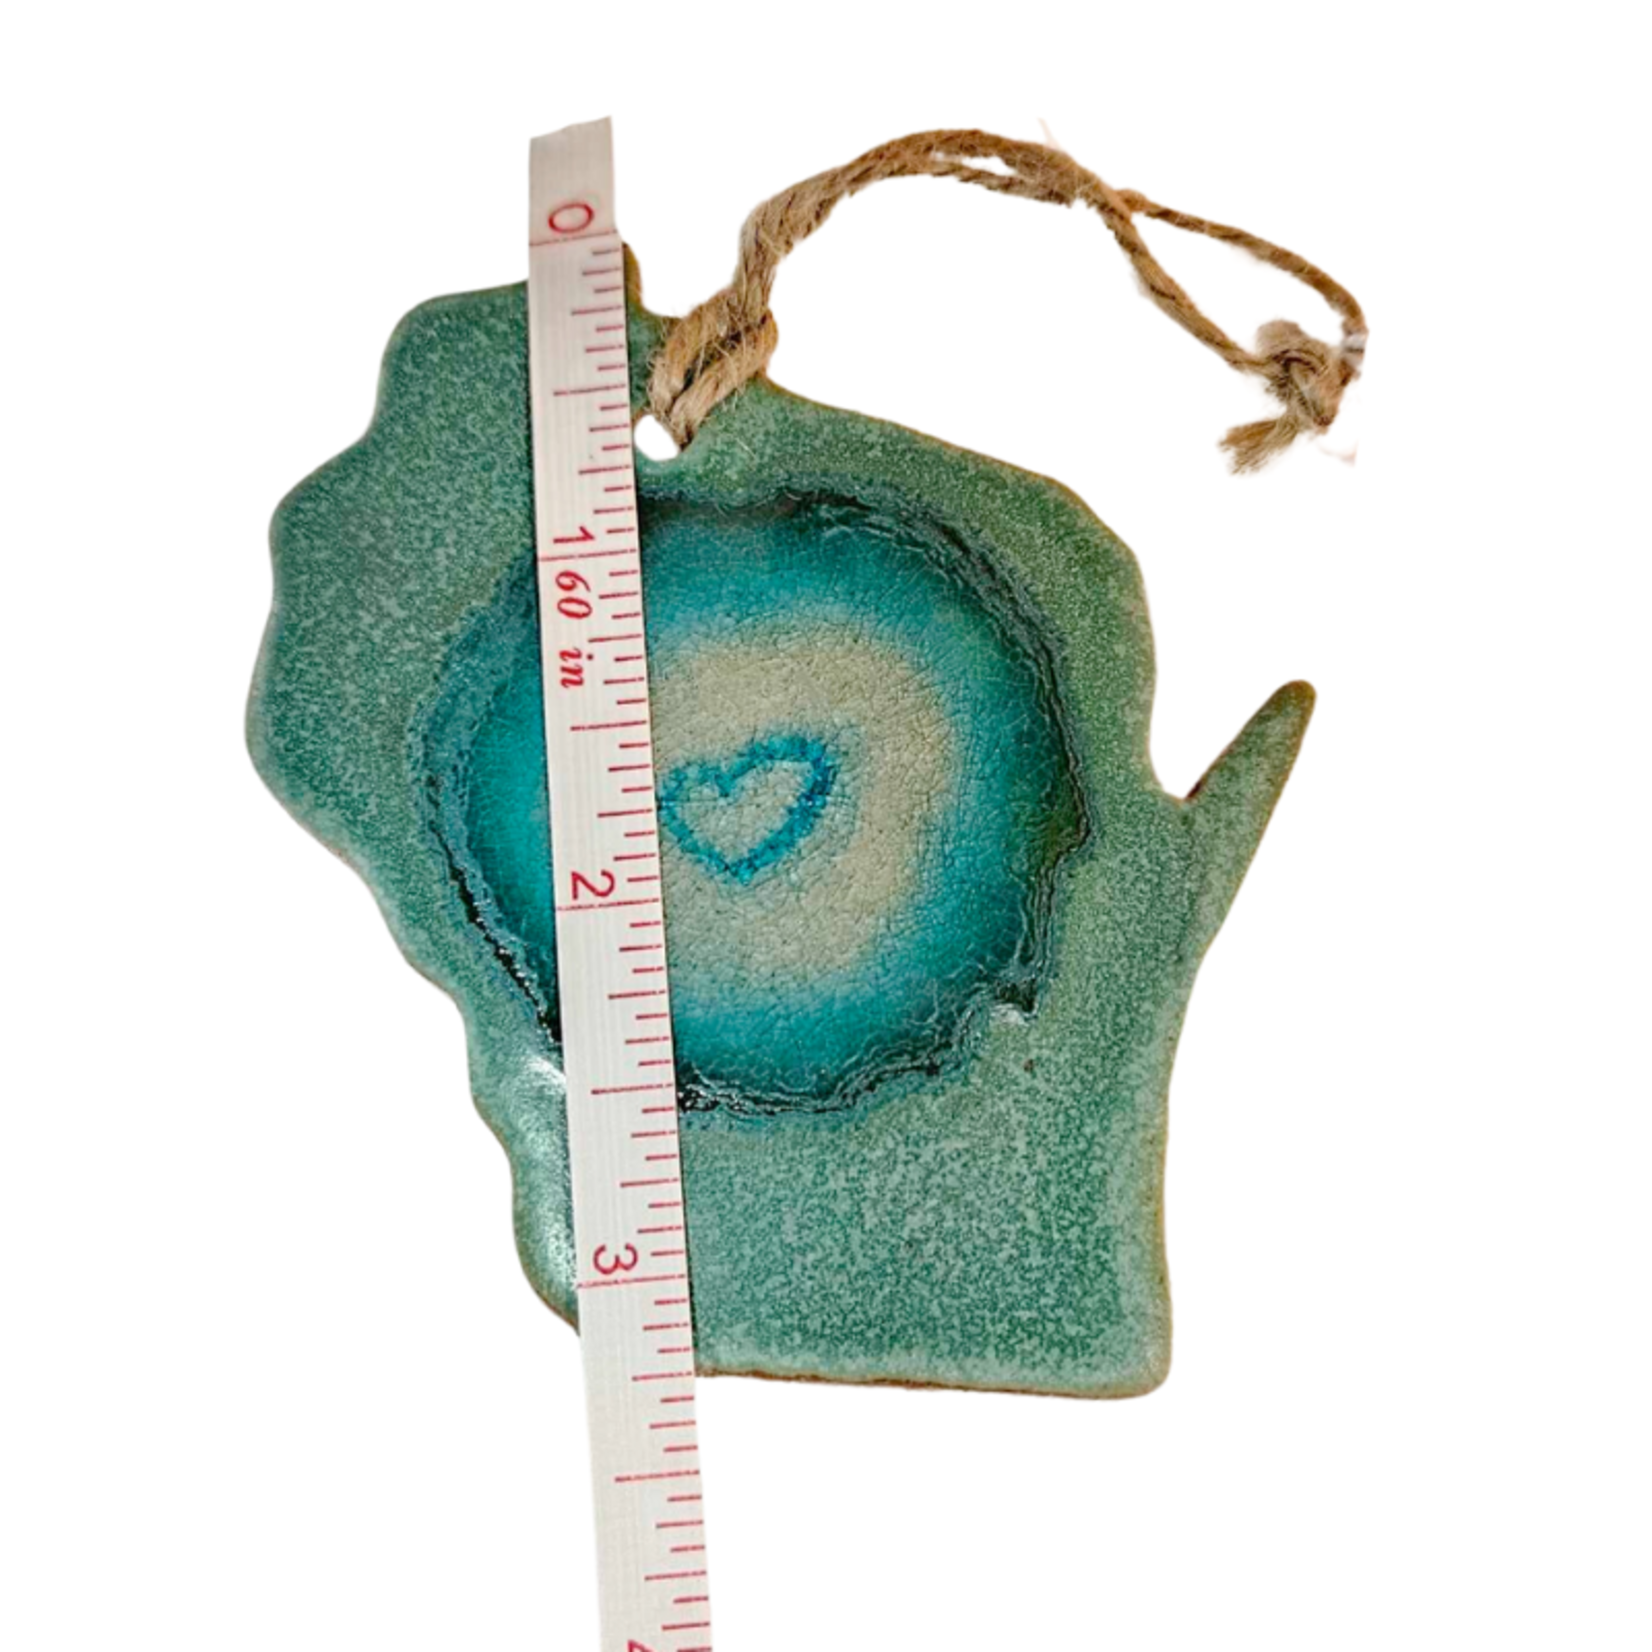 Agra Pottery Handmade Christmas Ornament - Wisconsin Paw Print - Agra Pottery - Made in Wausau, WI